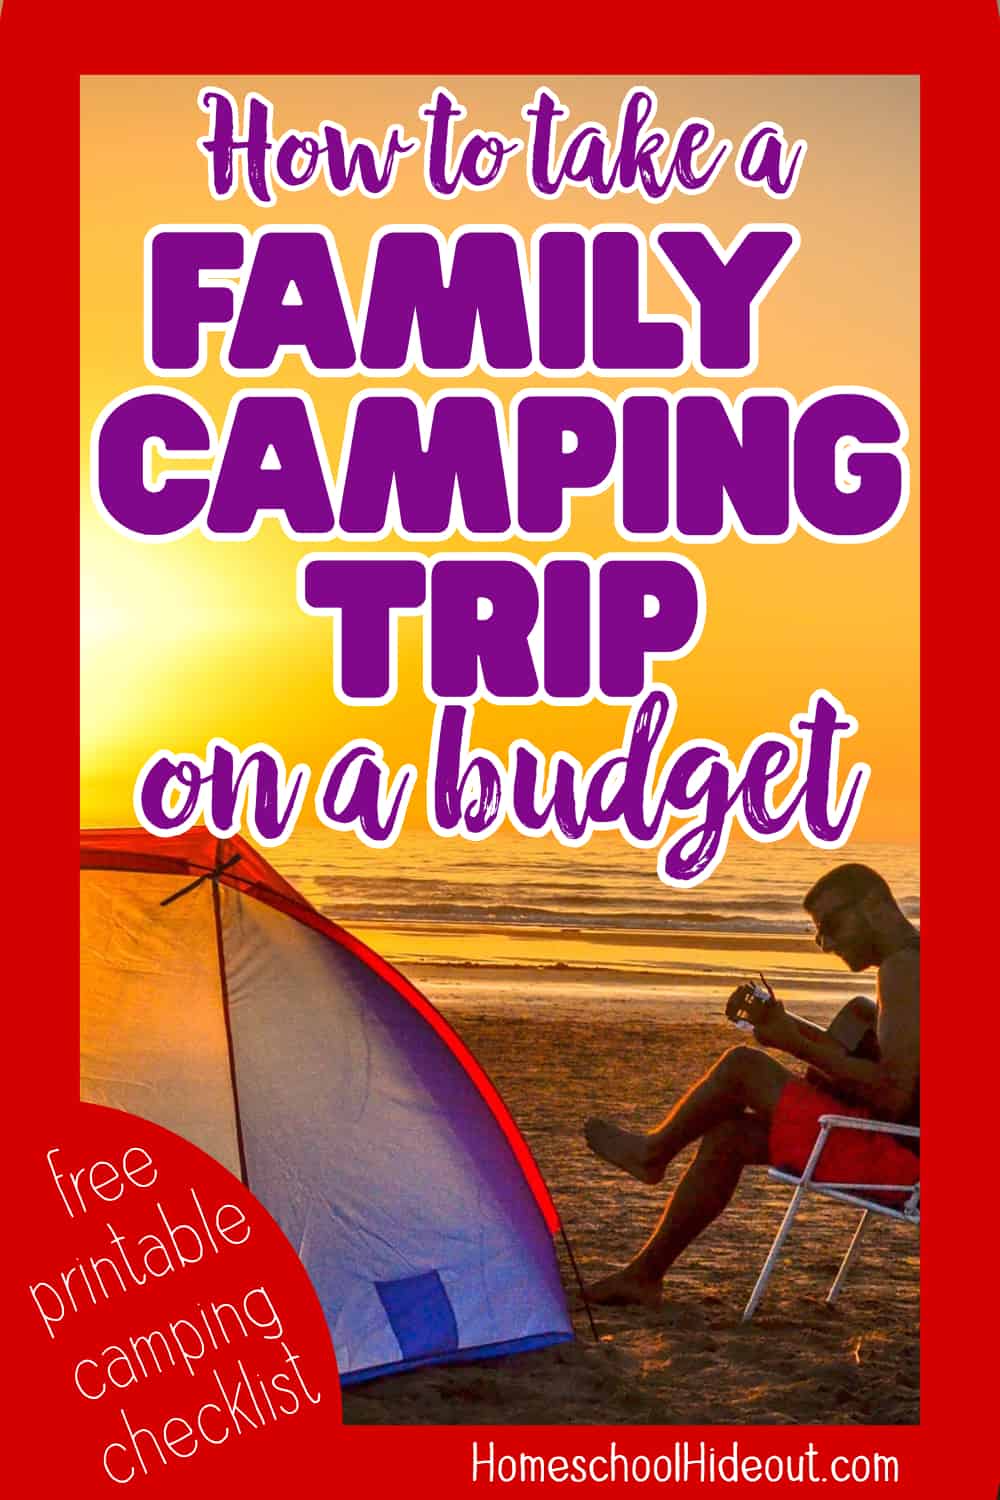 Camping on a budget doesn't have to suck! Some of our best family memories have been made around a campfire, in our cheap-o second hand tent!